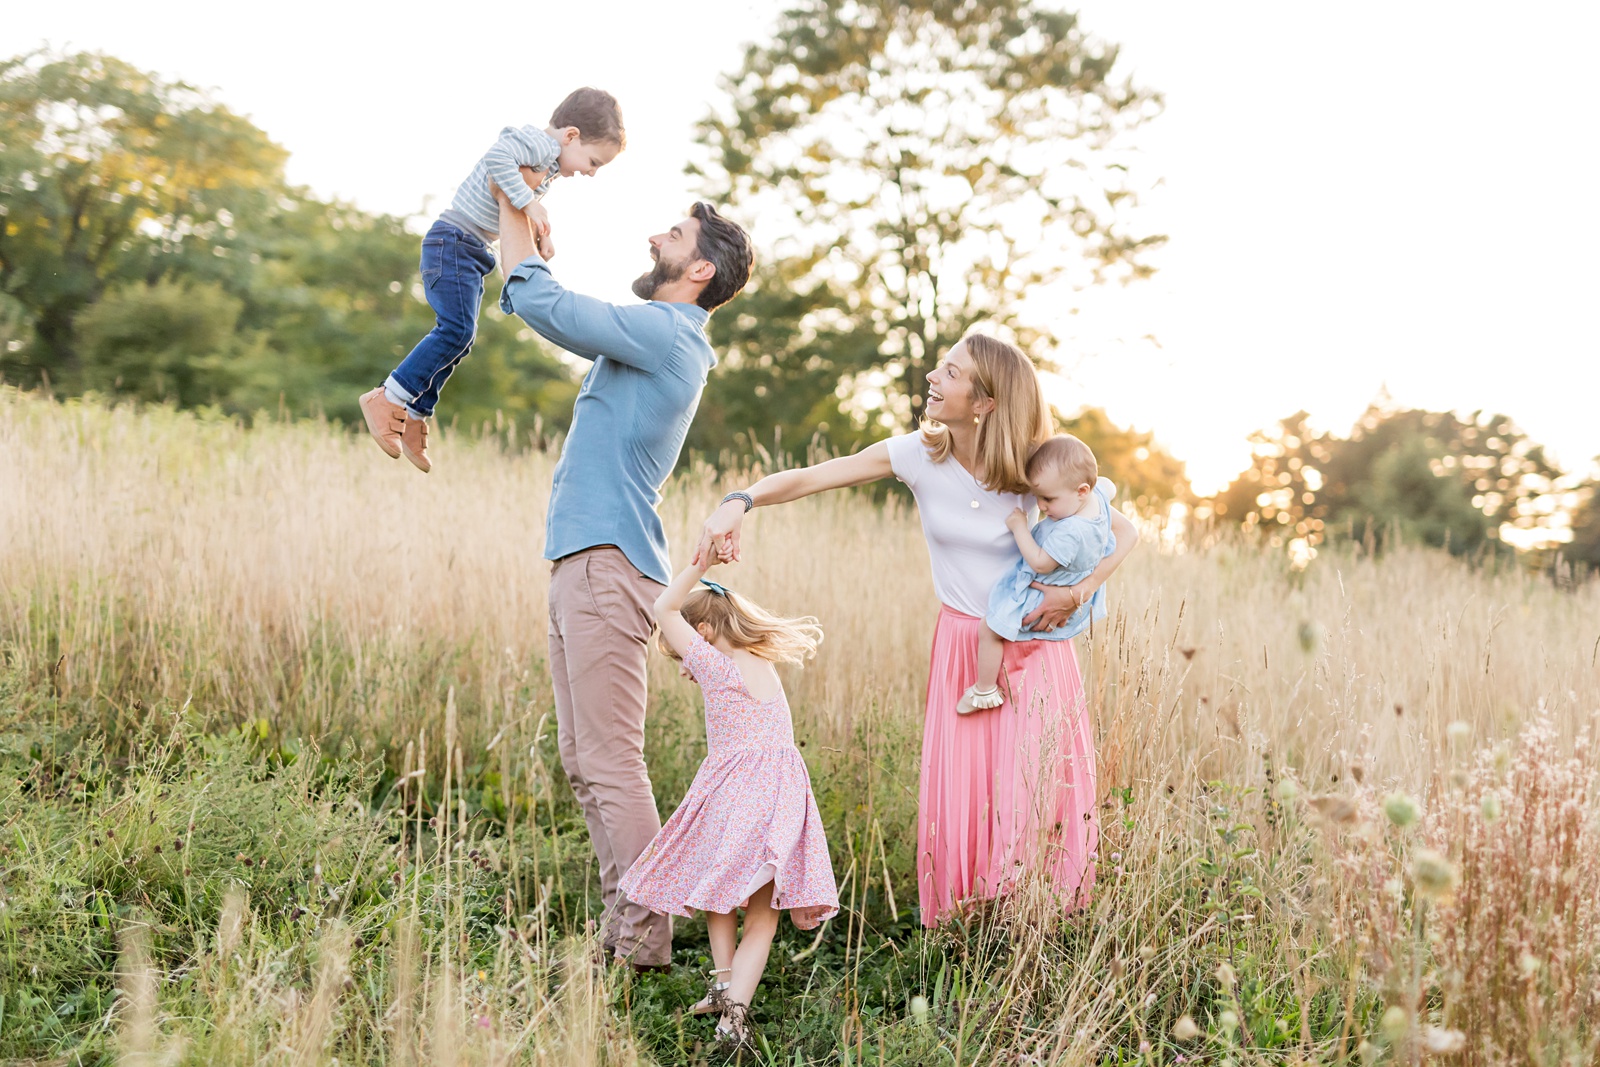 Pink outfit 2 70+ Best Chosen Family Photo Outfit Ideas in Summer - 47